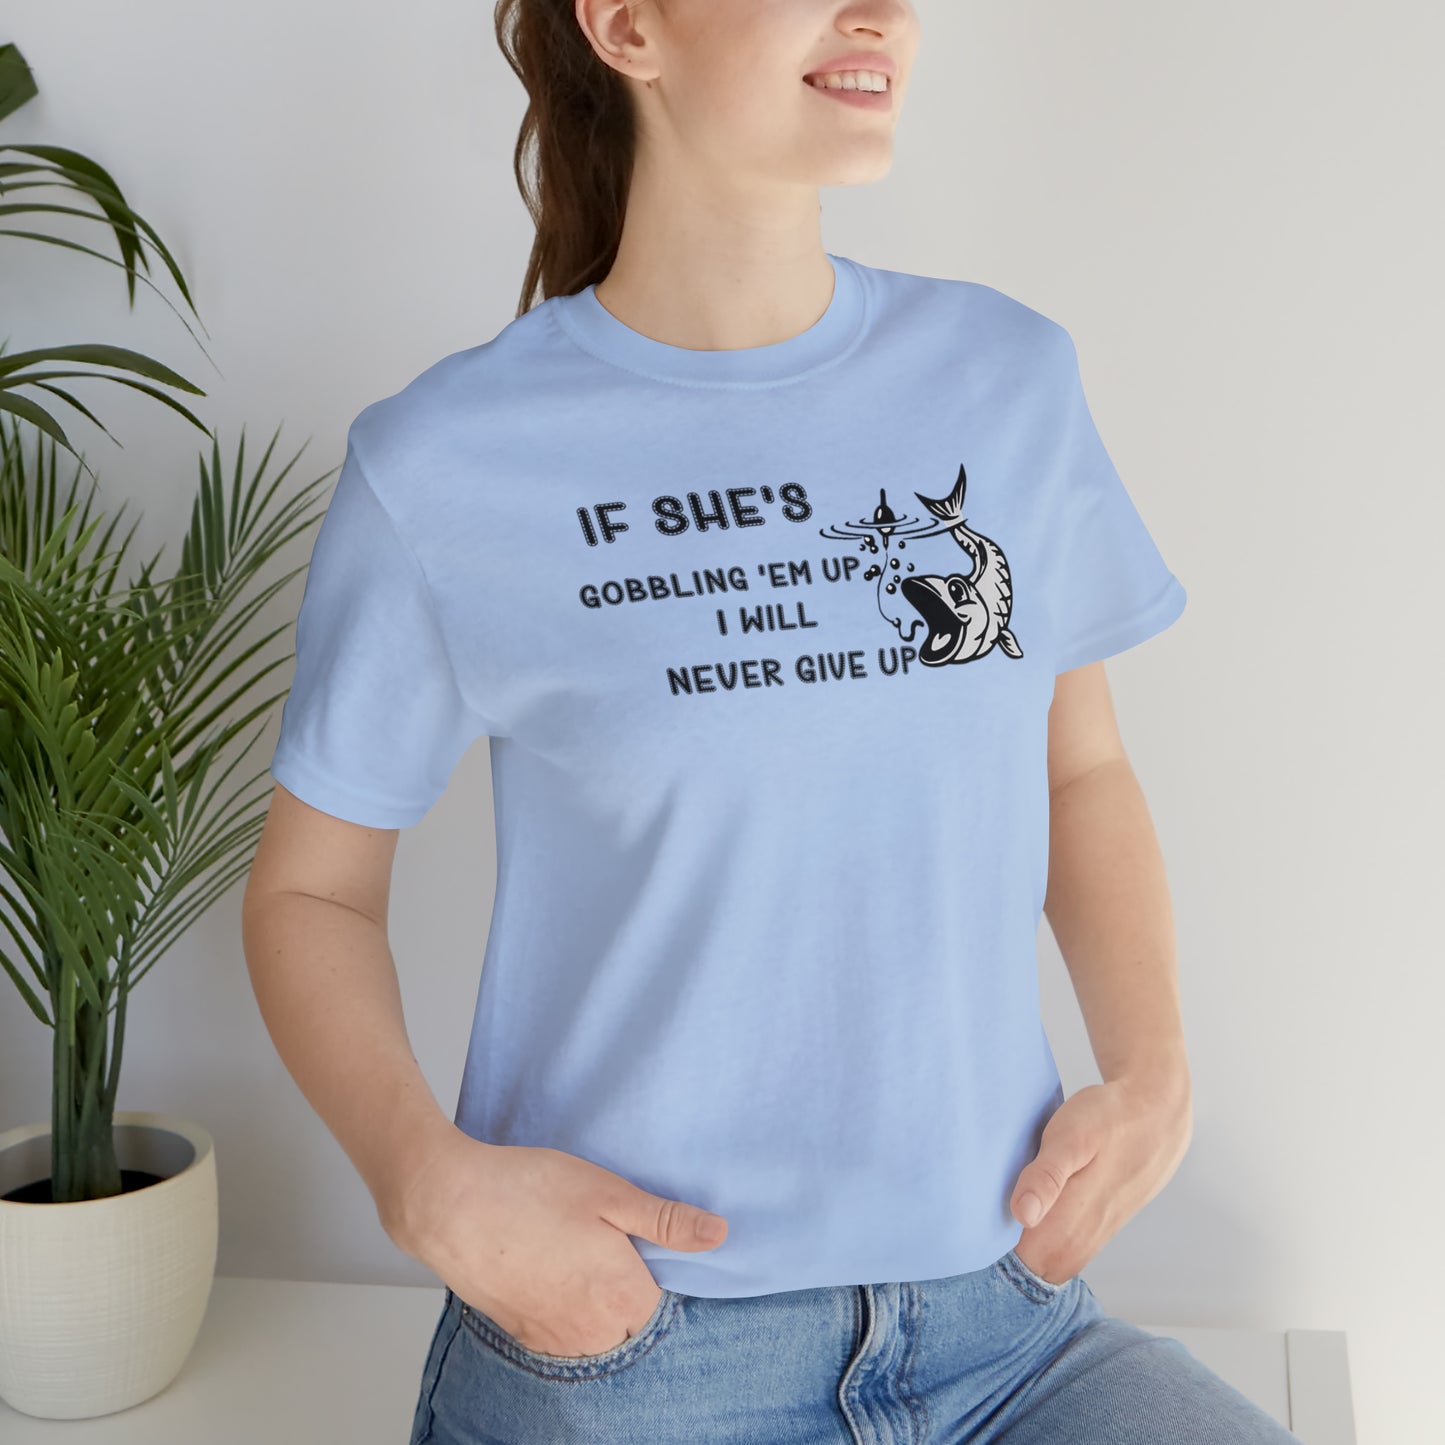 Unisex Jersey Short Sleeve Tee: IF SHE'S GOBBLING EM UP, I WILL NEVER GIVE UP